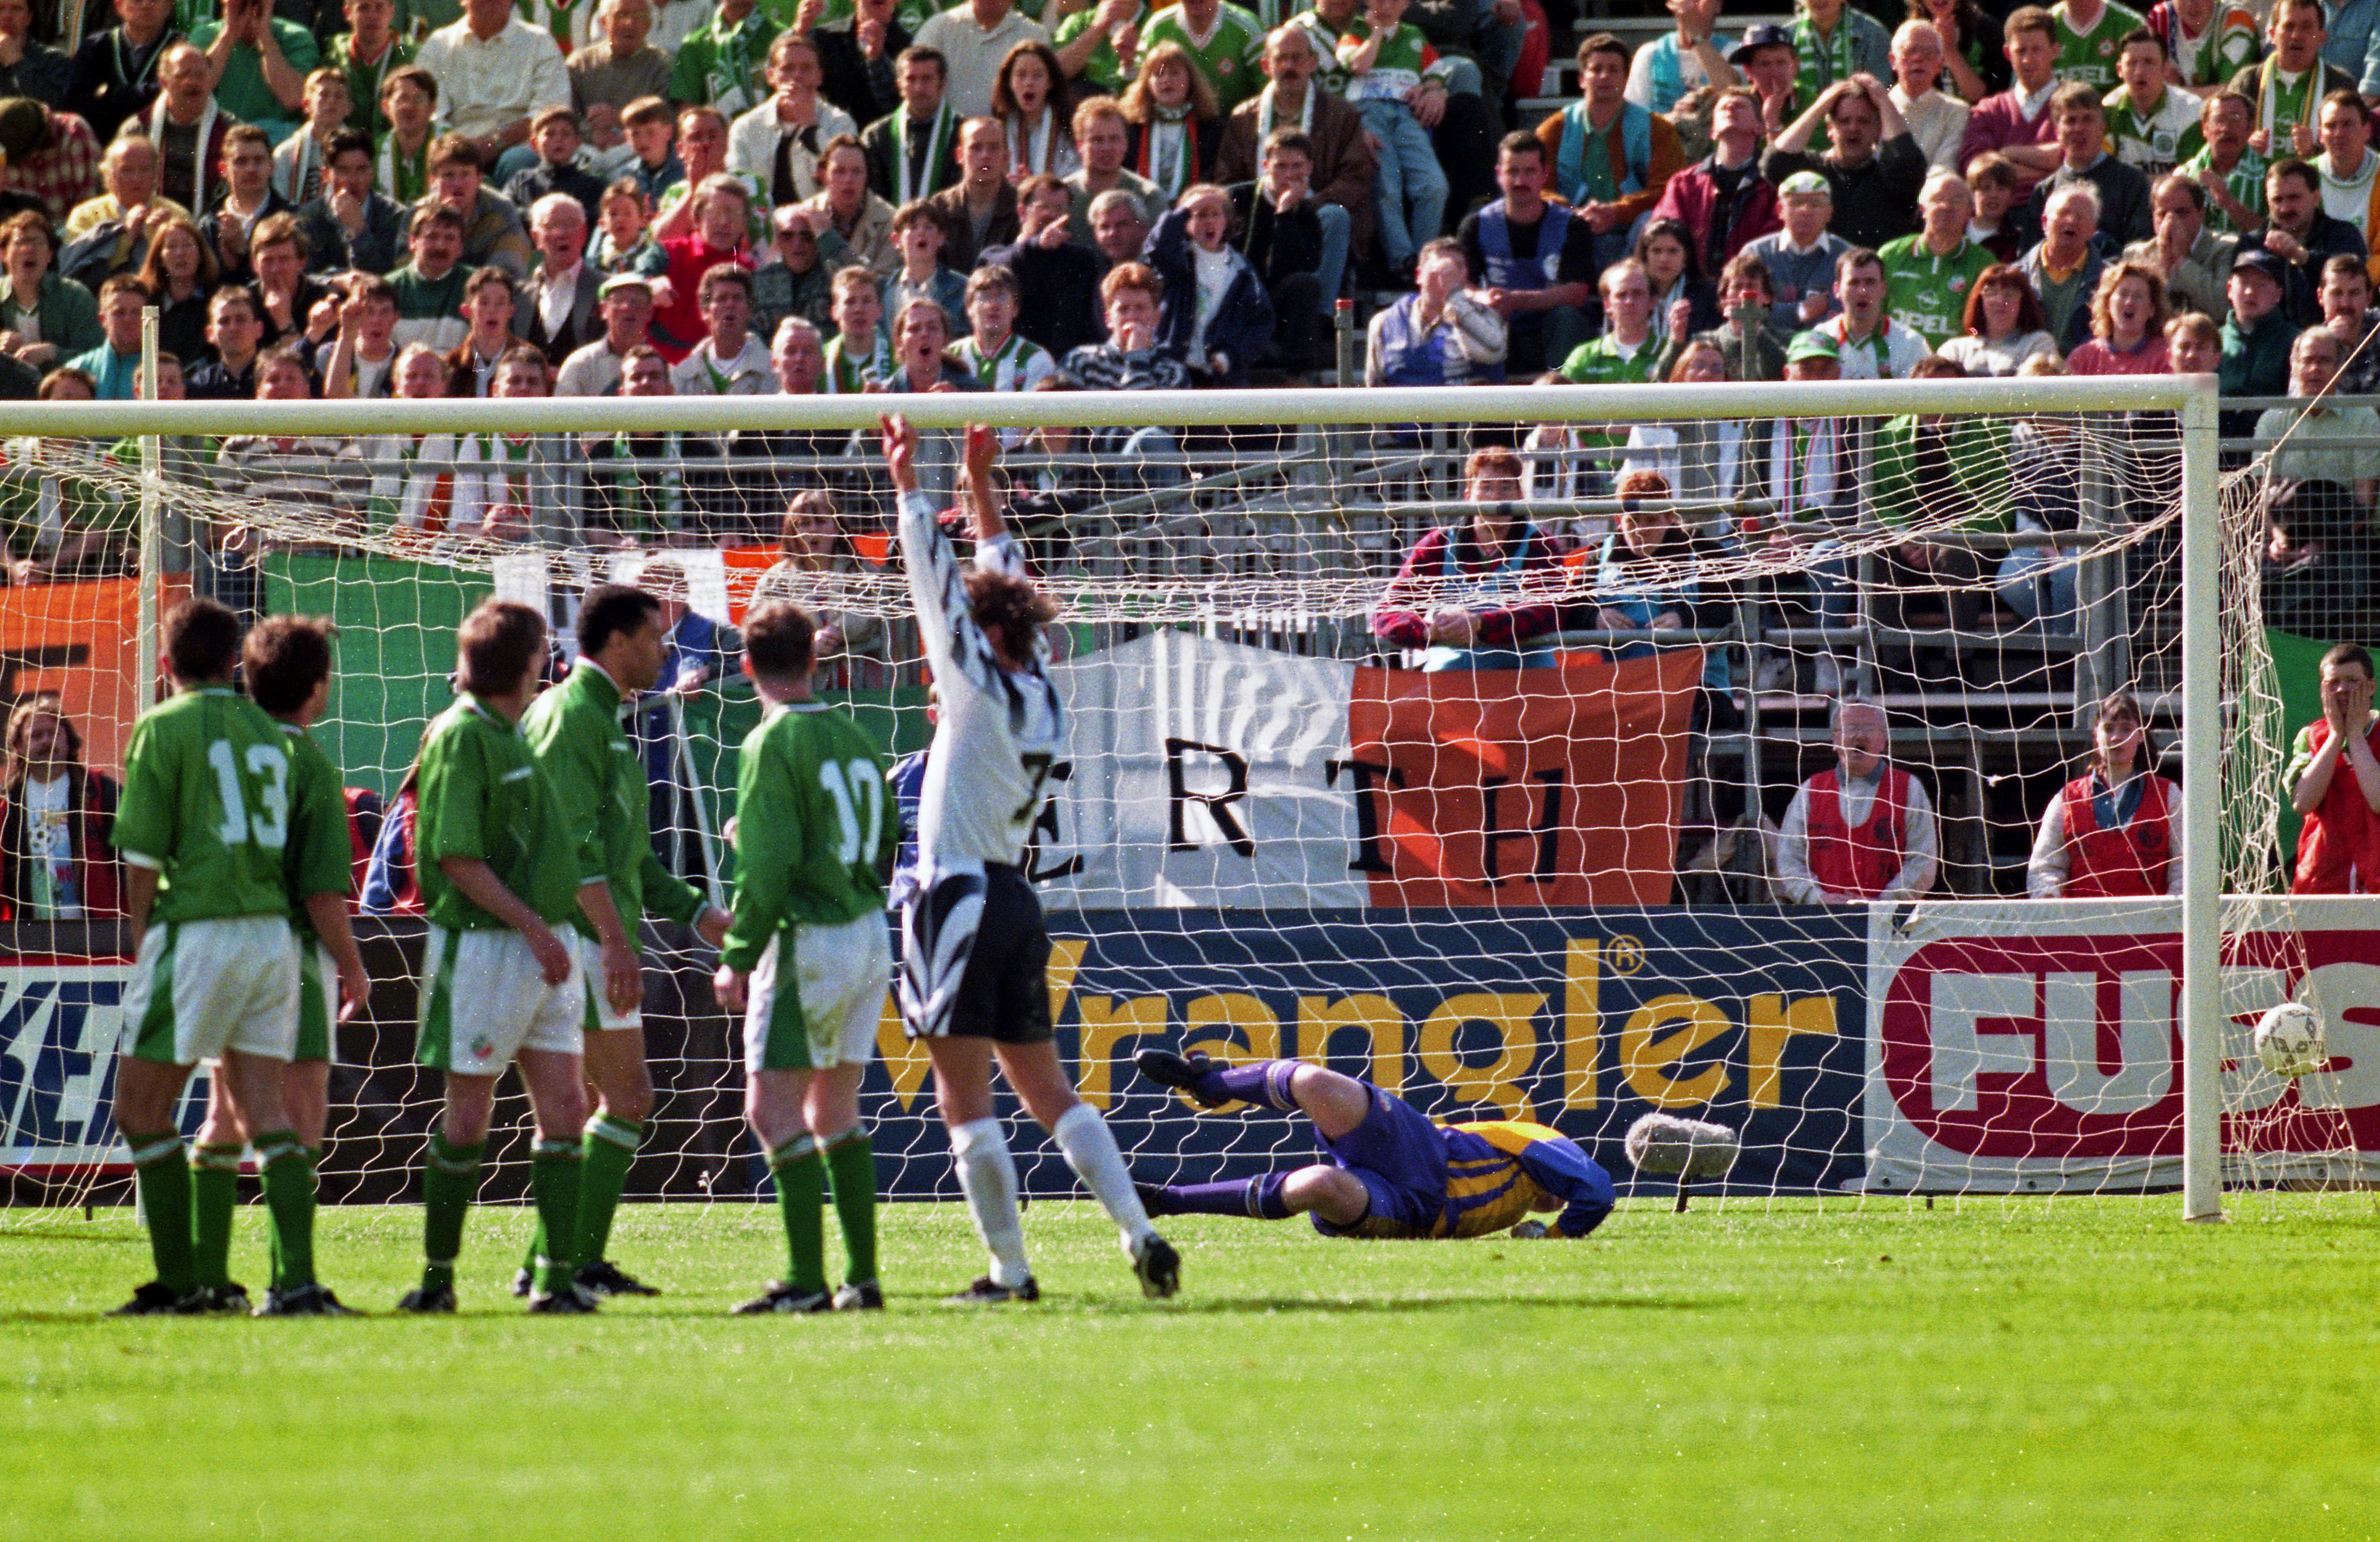 Euro 1996 Qualifier 11/6/1995 Republic of Ireland vs Austria Austria's Toni Polser (not in picture) scores from a free kick Mandatory Credit ©INPHO/James Meehan